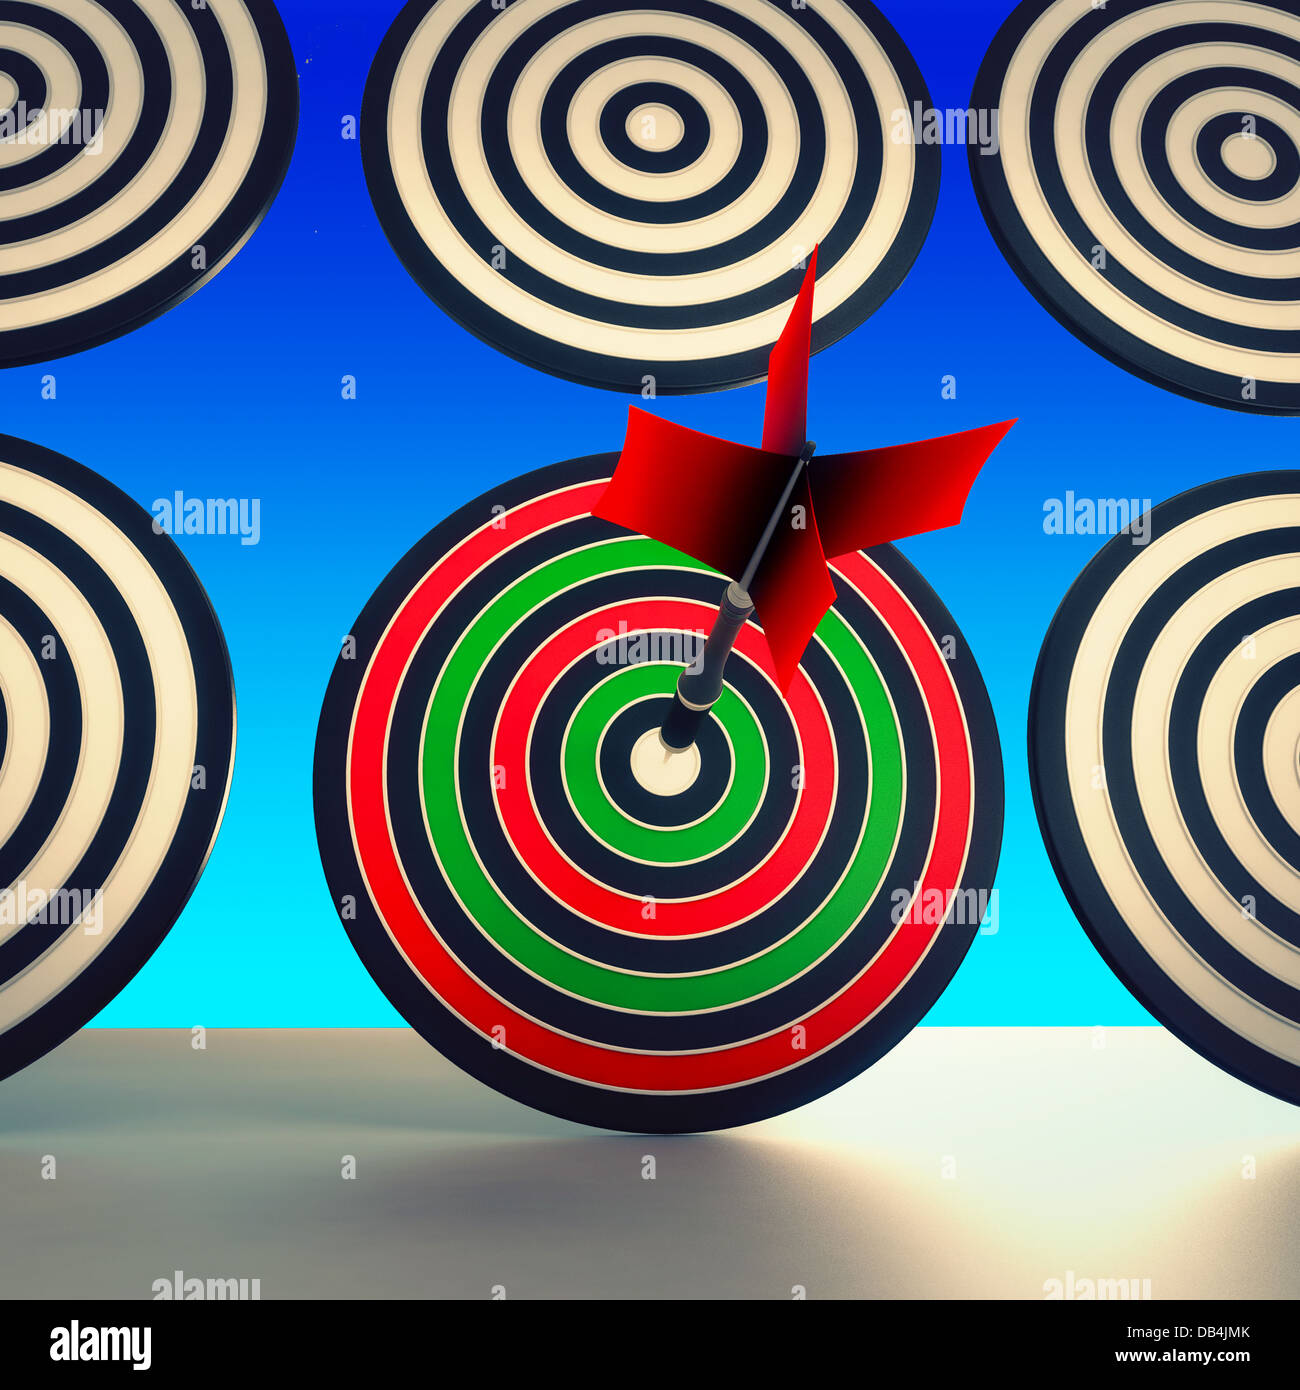 Target Winner Shows Skill, Performance And Accuracy Stock Photo